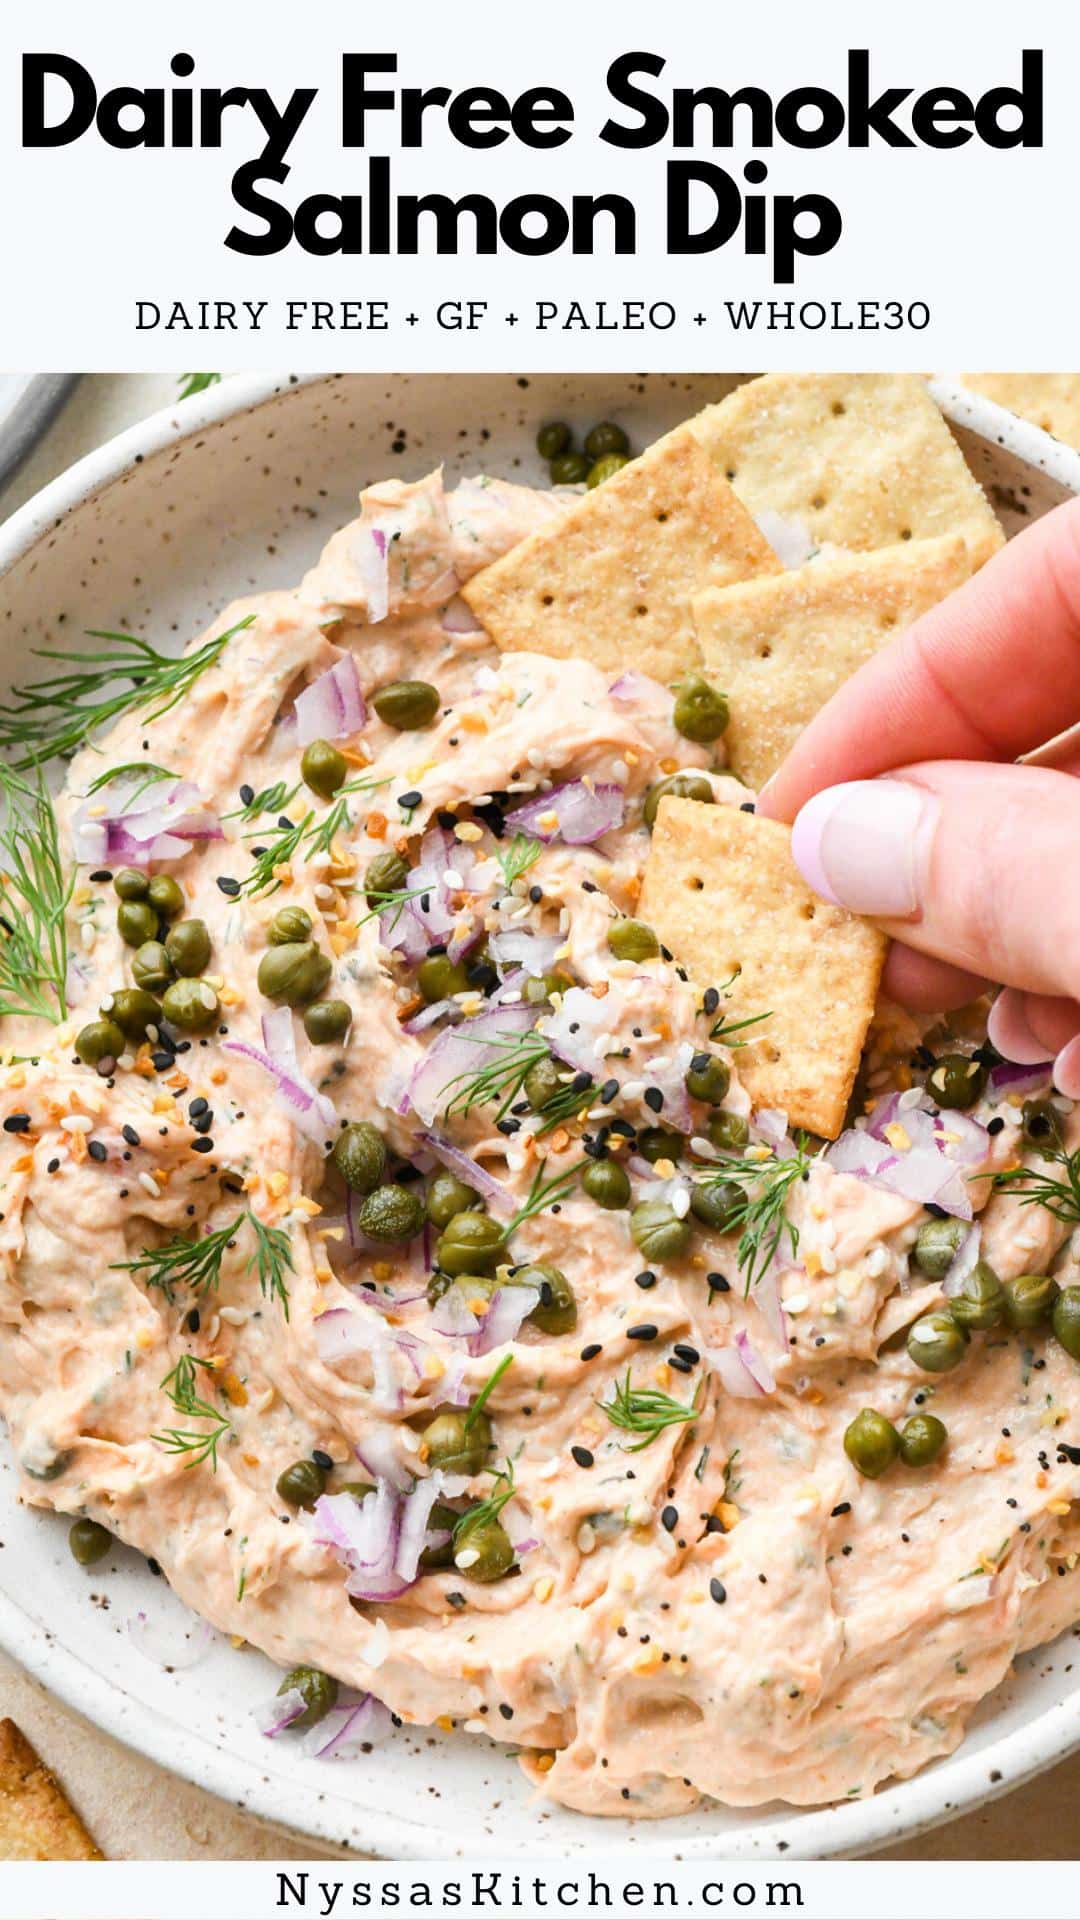 Learn how to transform a classic party dip into a dairy free delight with this recipe for dairy free smoked salmon dip! Made without cream cheese, this dip is the perfect appetizer for any gathering - with a creamy texture and an irresistibly bold flavor that will keep your guests coming back for more. Dairy free, gluten free, paleo friendly, and Whole30 friendly.